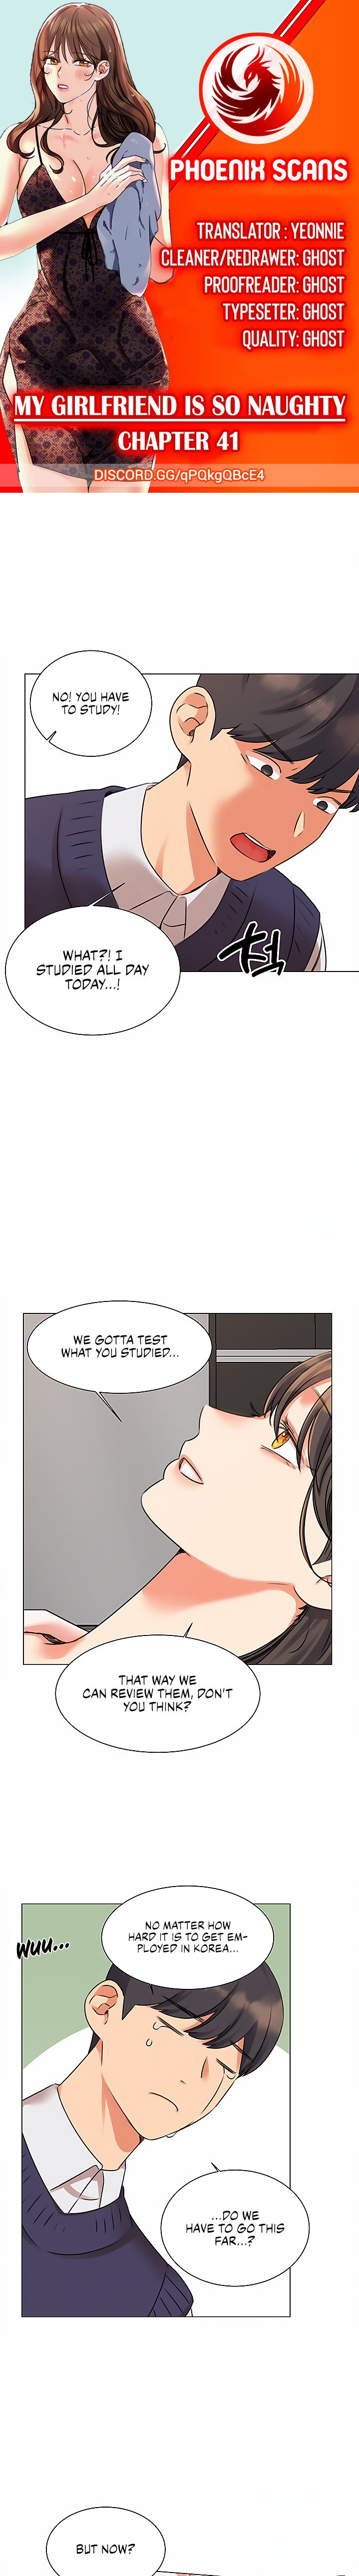 My girlfriend is so naughty - Chapter 41 Page 1